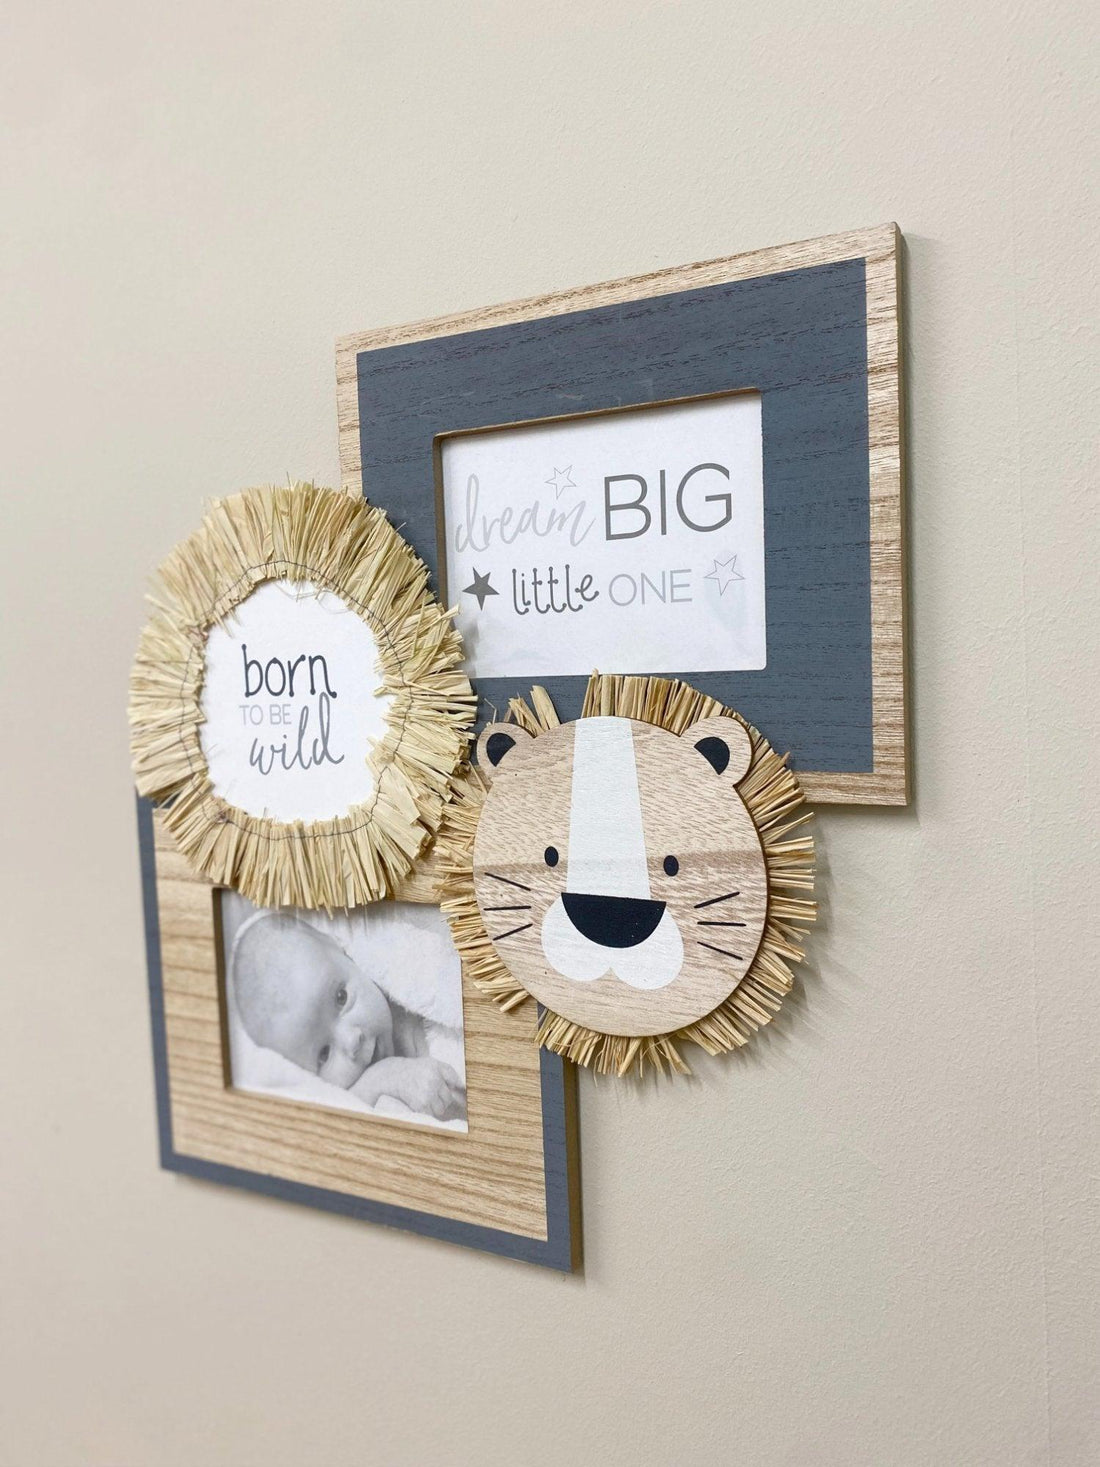 Double Lion Photograph Frame - £26.99 - New Baby 